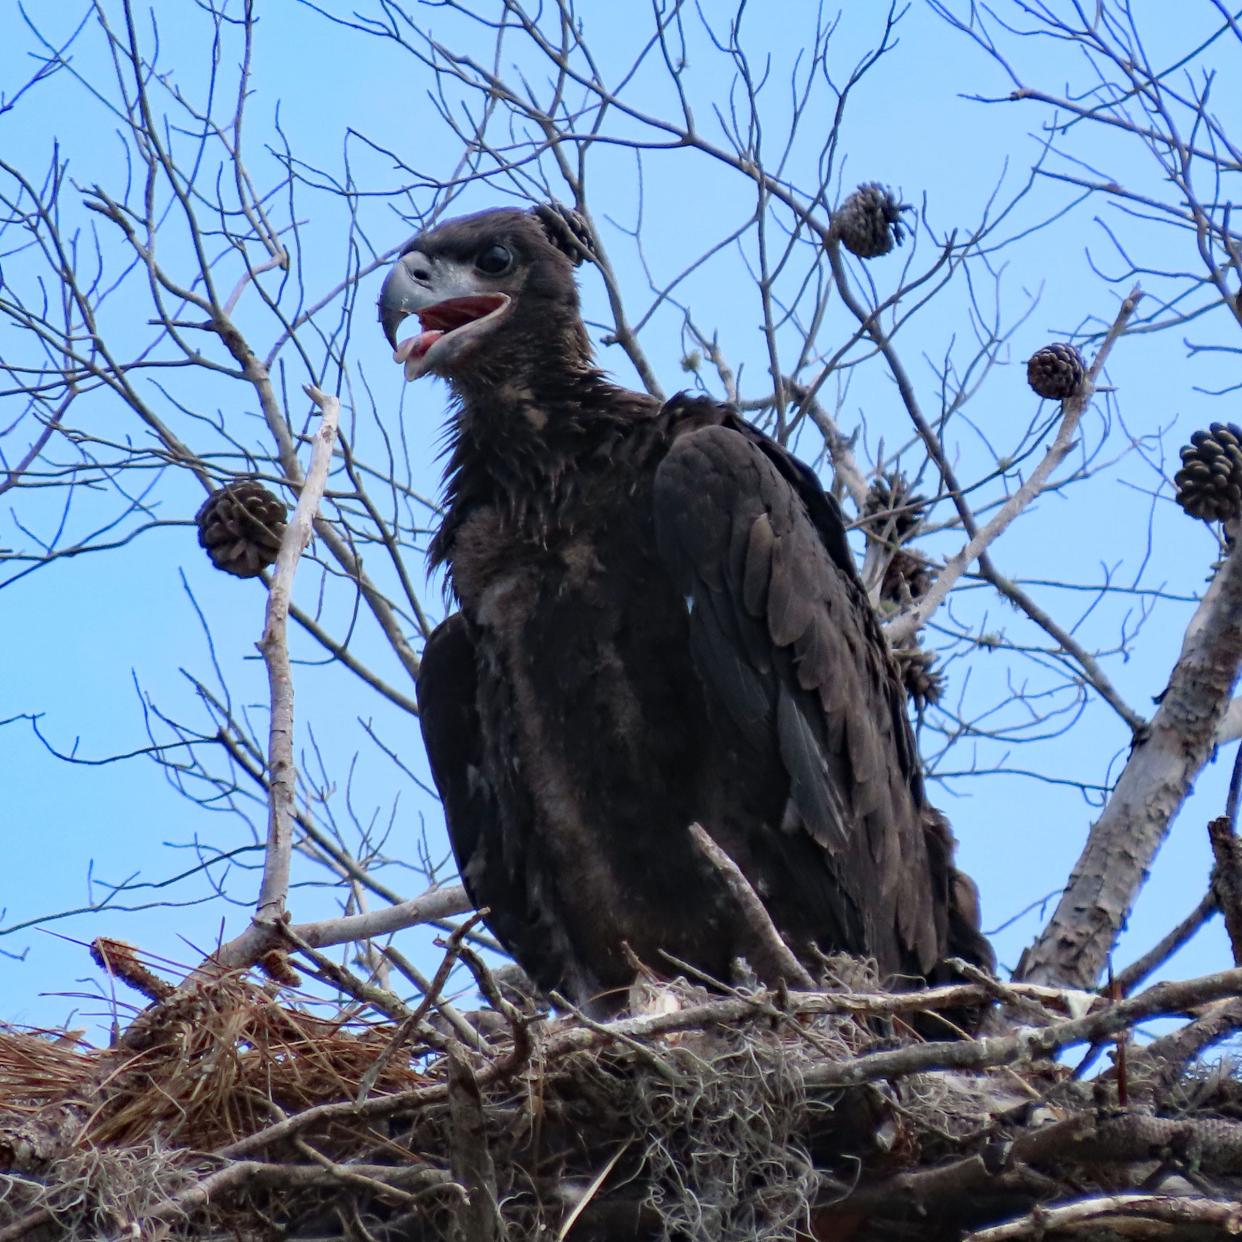 An eaglet is seen on a nest at Tiger Creek Preserve, an area connected to the three “priority areas” designated for potential conservation: The Ridge to River Corridor, Peace River Headwaters Corridor and Peace Creek Linkage Conservation Strategy.